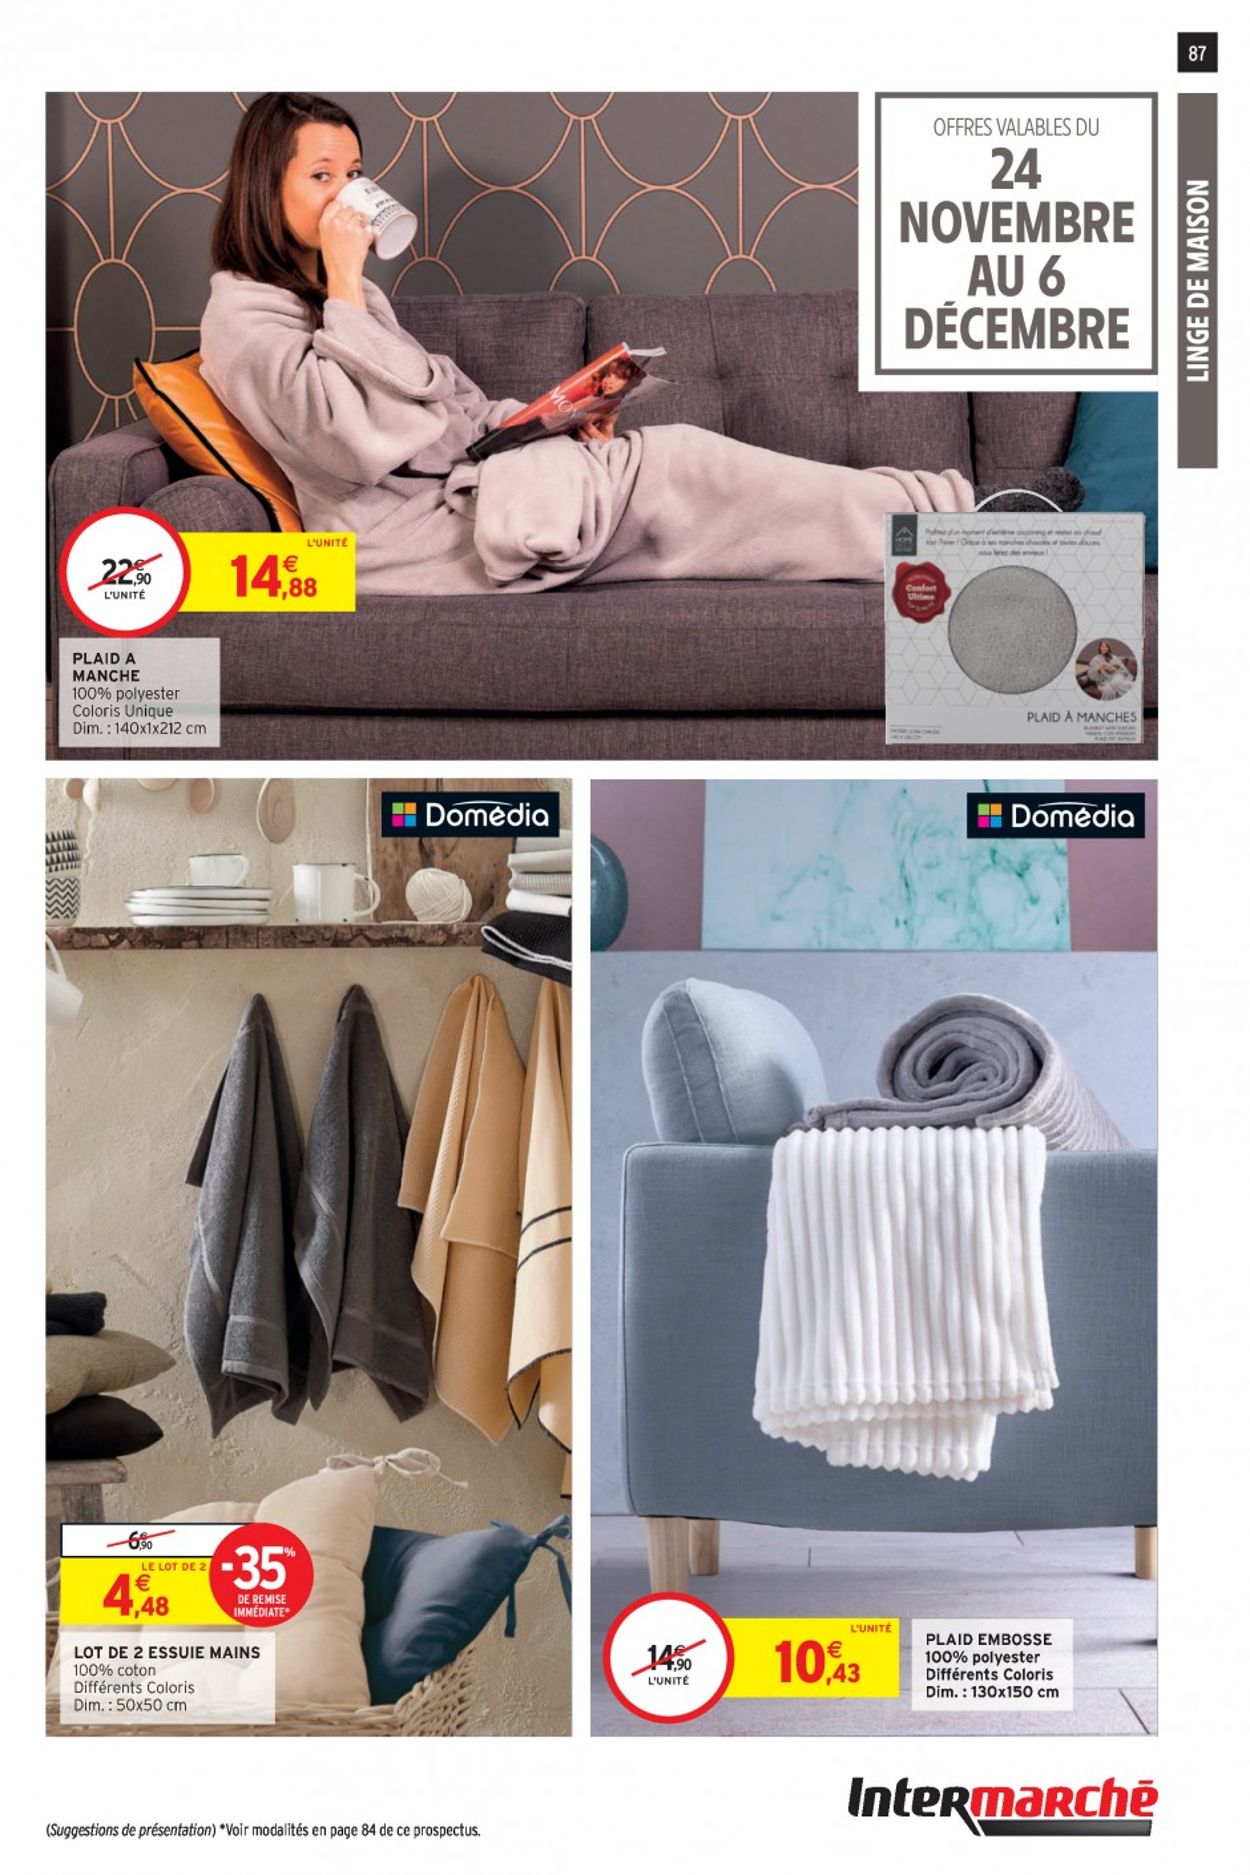 Intermarché Black Friday 2020 Catalogue - 24.11-29.11.2020 (Page 87)